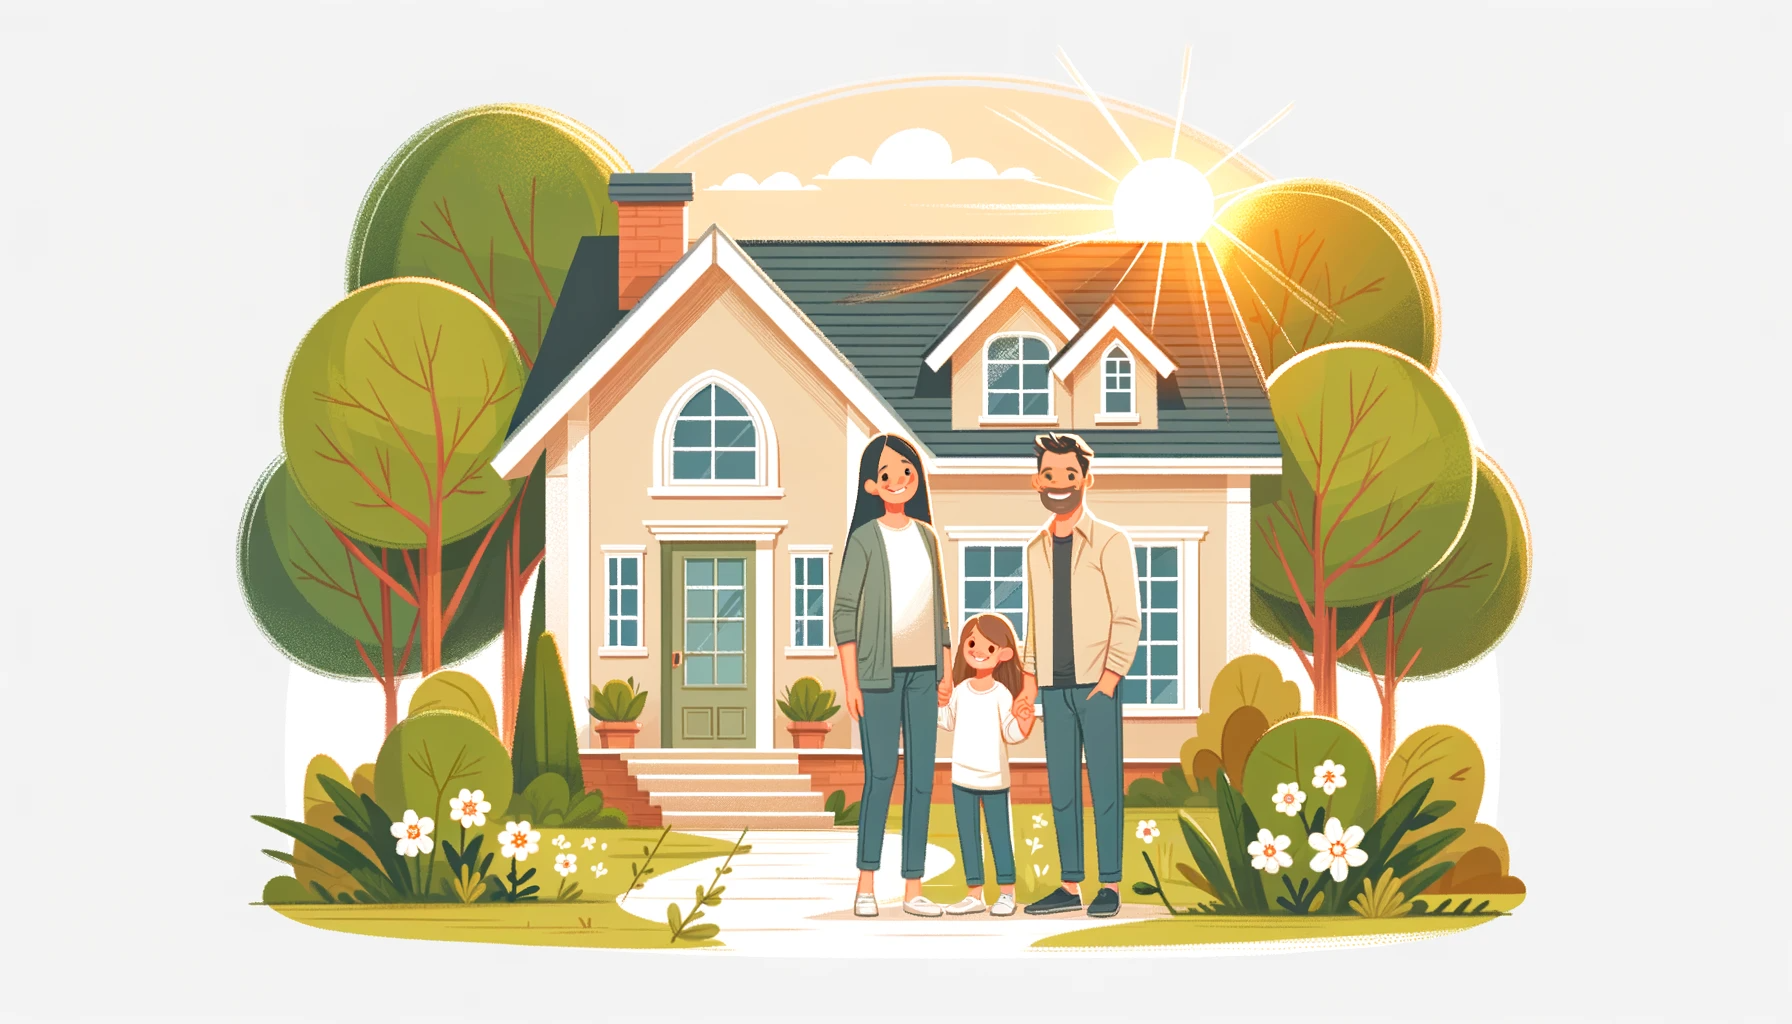 rectangular image for a blog about mortgage advantages depicting a happy family in front of their new home surrounded by lush greenery warm and inv